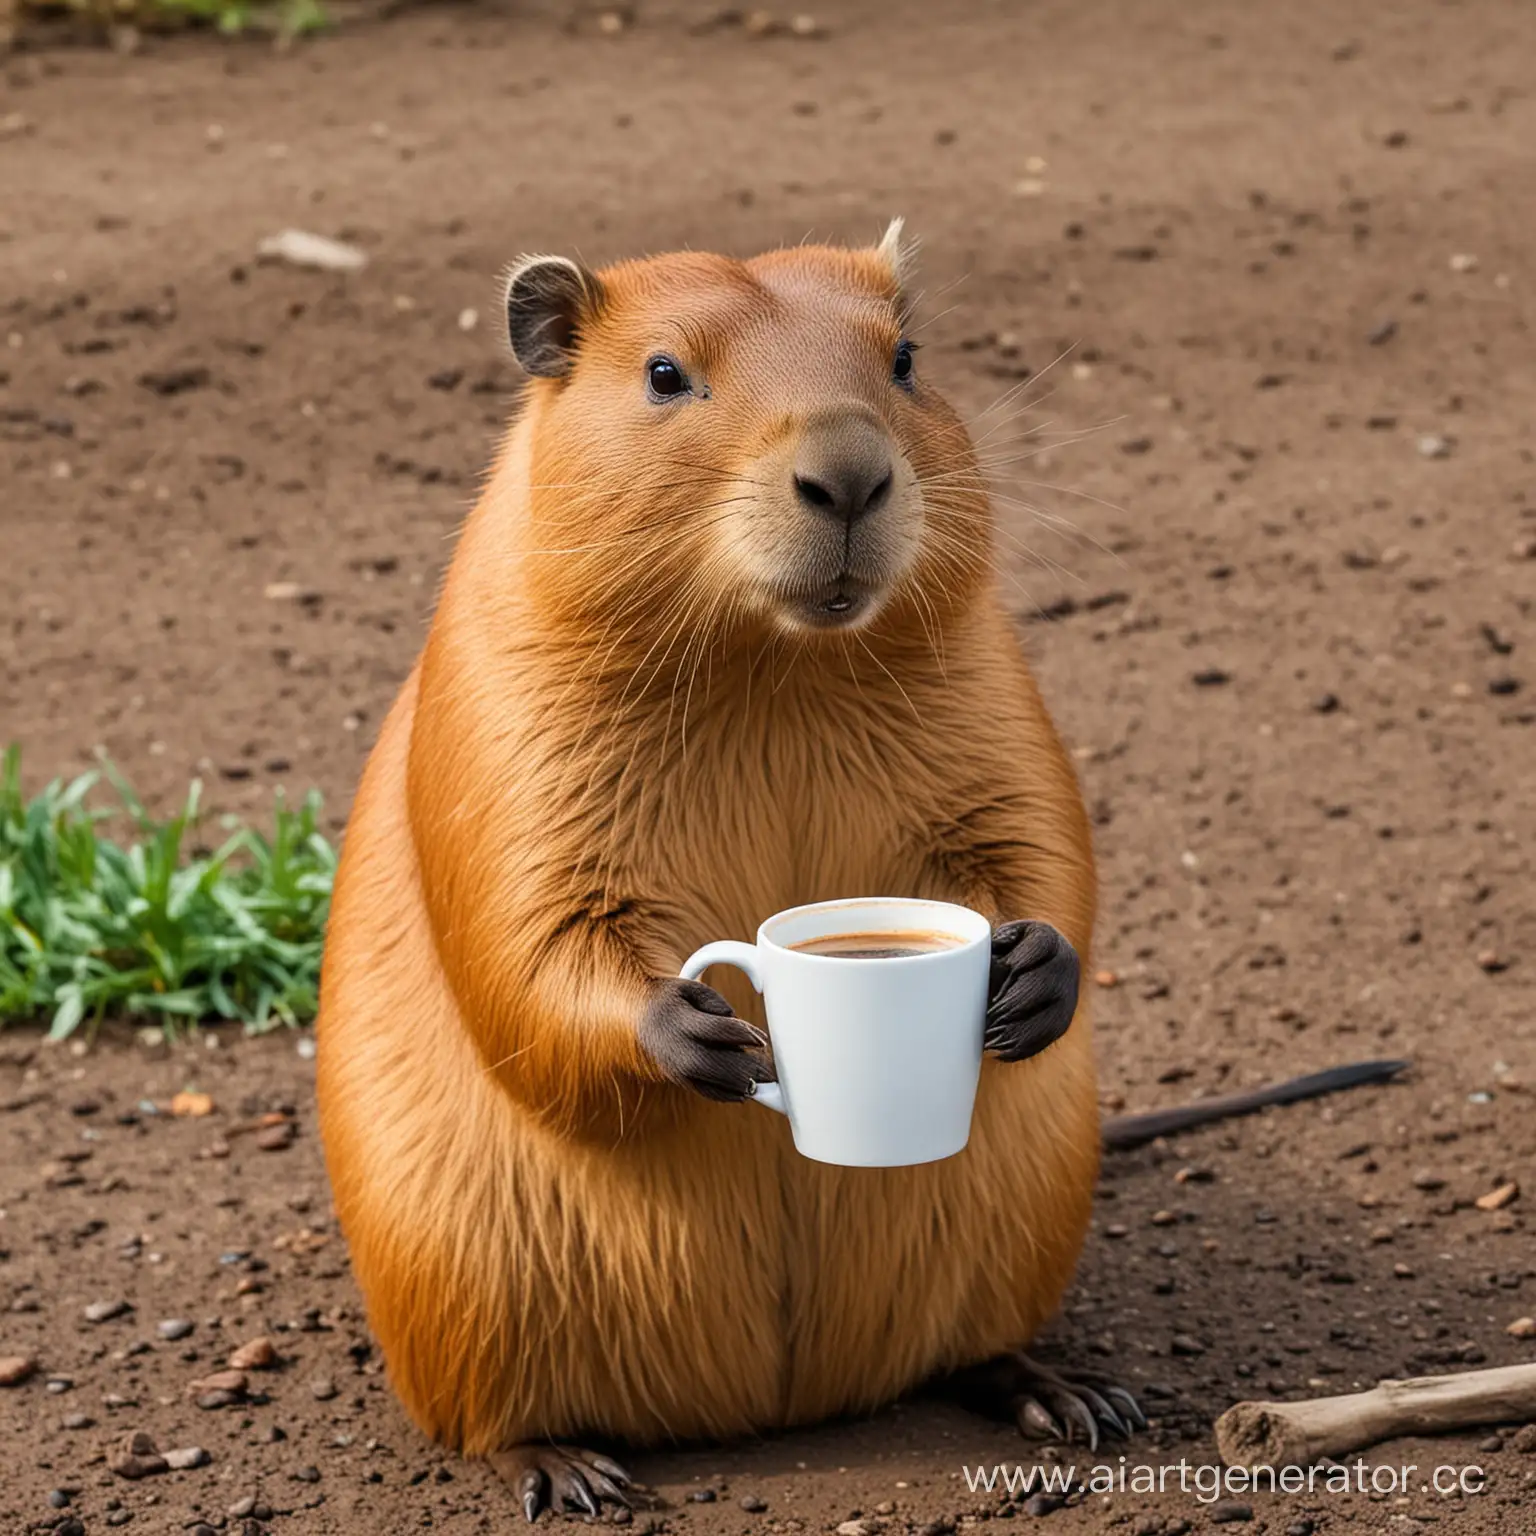 Capybara-Holding-a-Cup-of-Coffee-in-Serene-Morning-Setting